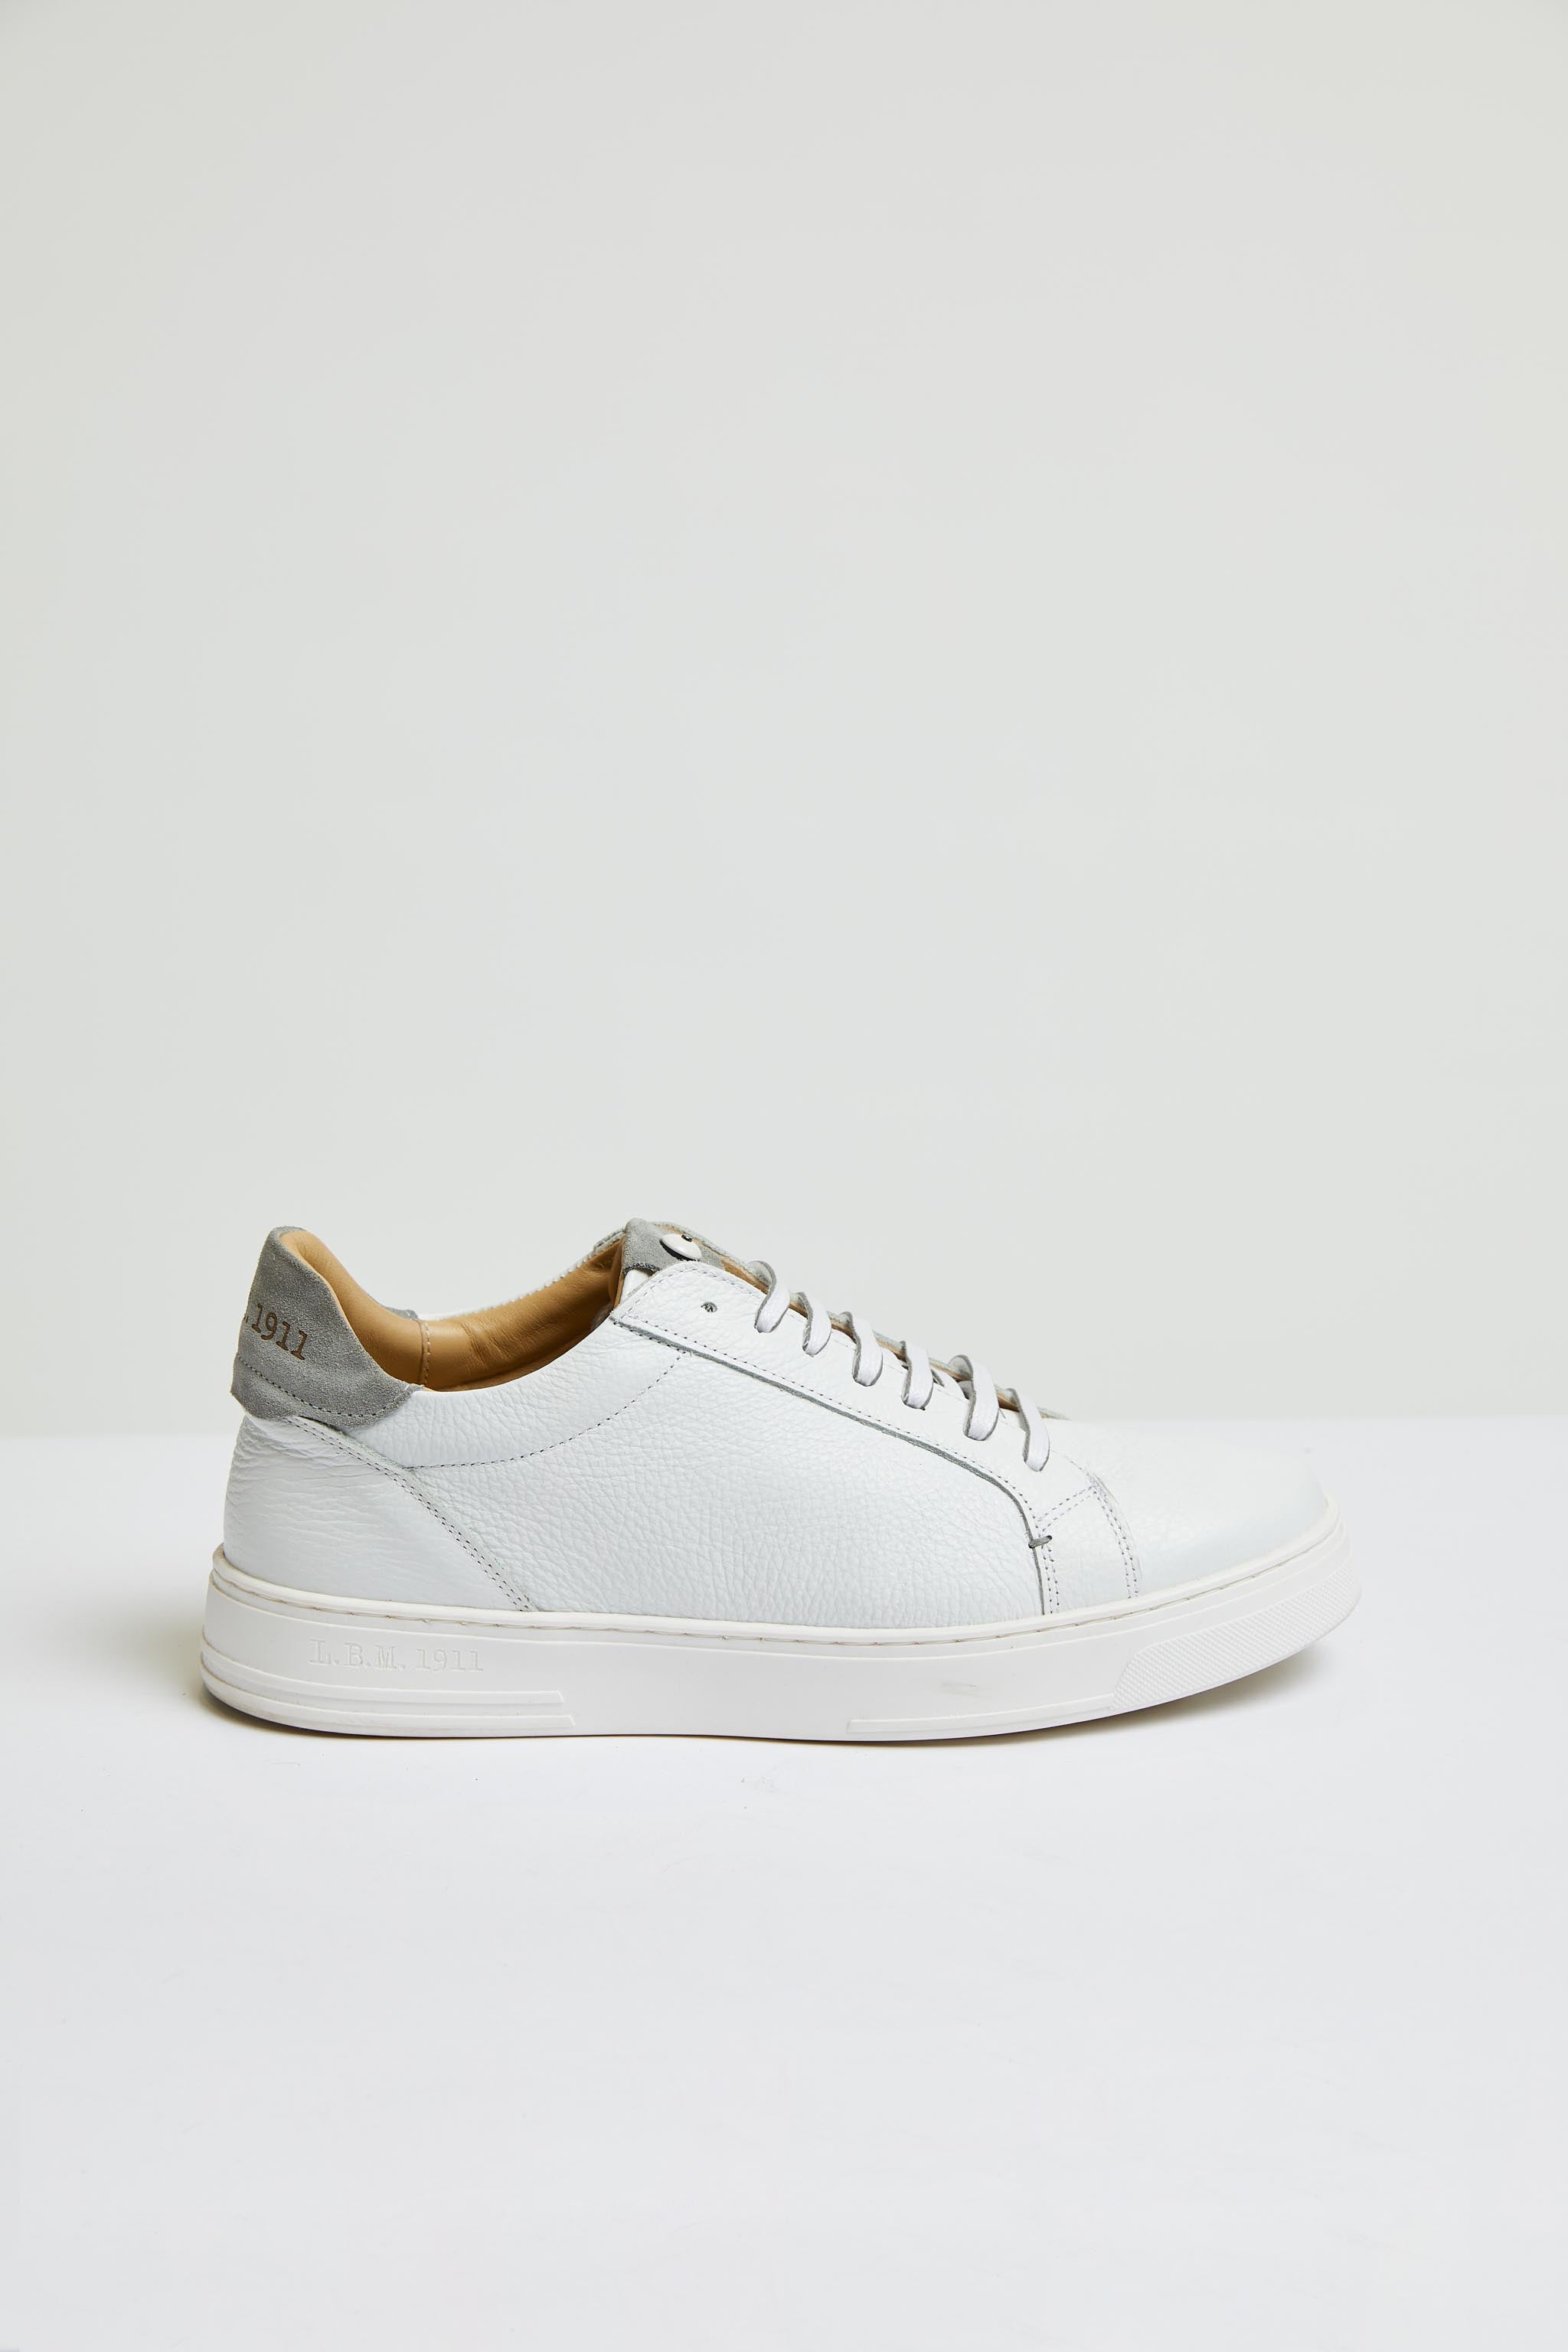 retro-styled tennis shoe in gray